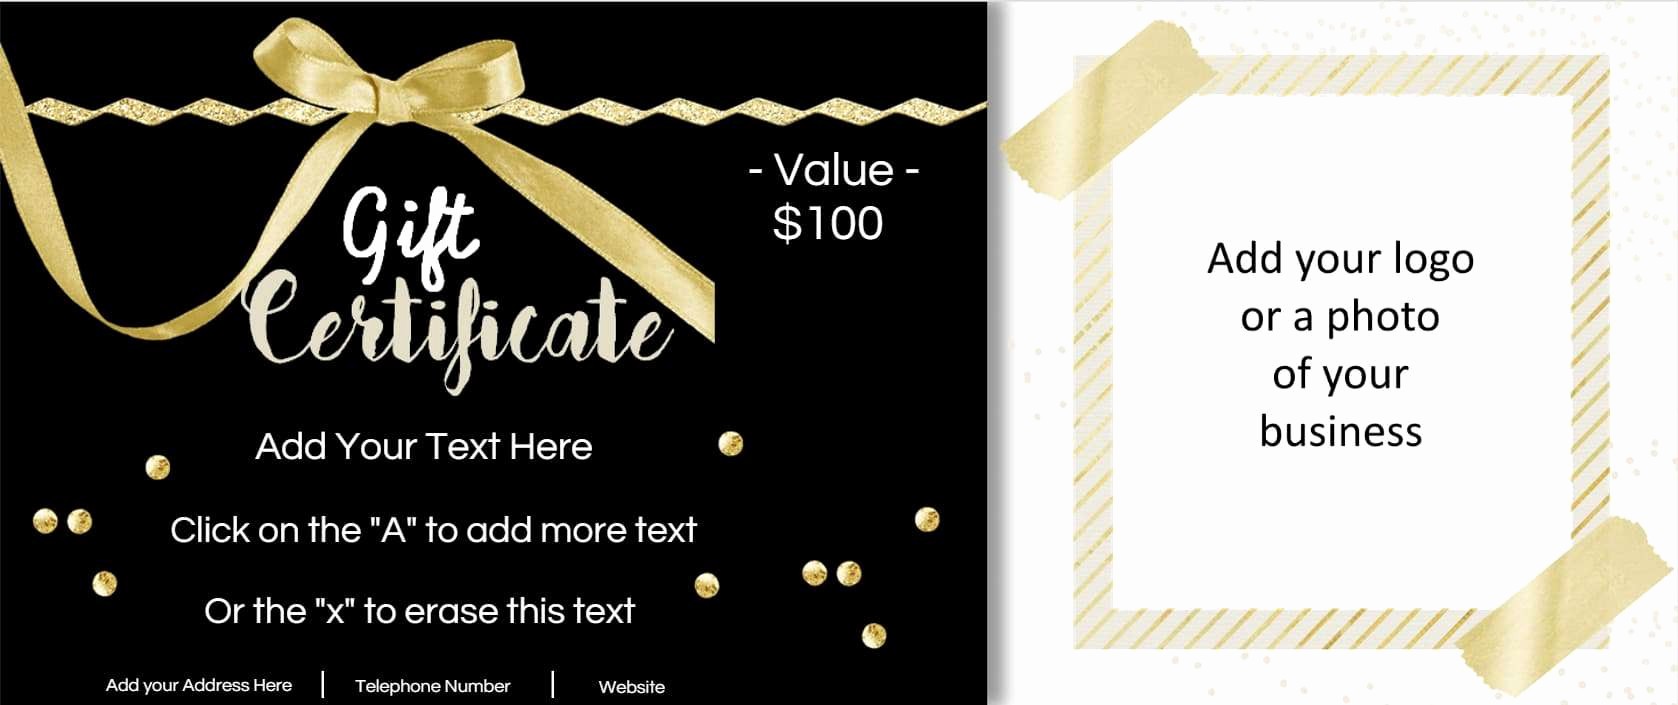 How to Make Gift Certificate Luxury Gift Certificate Template with Logo